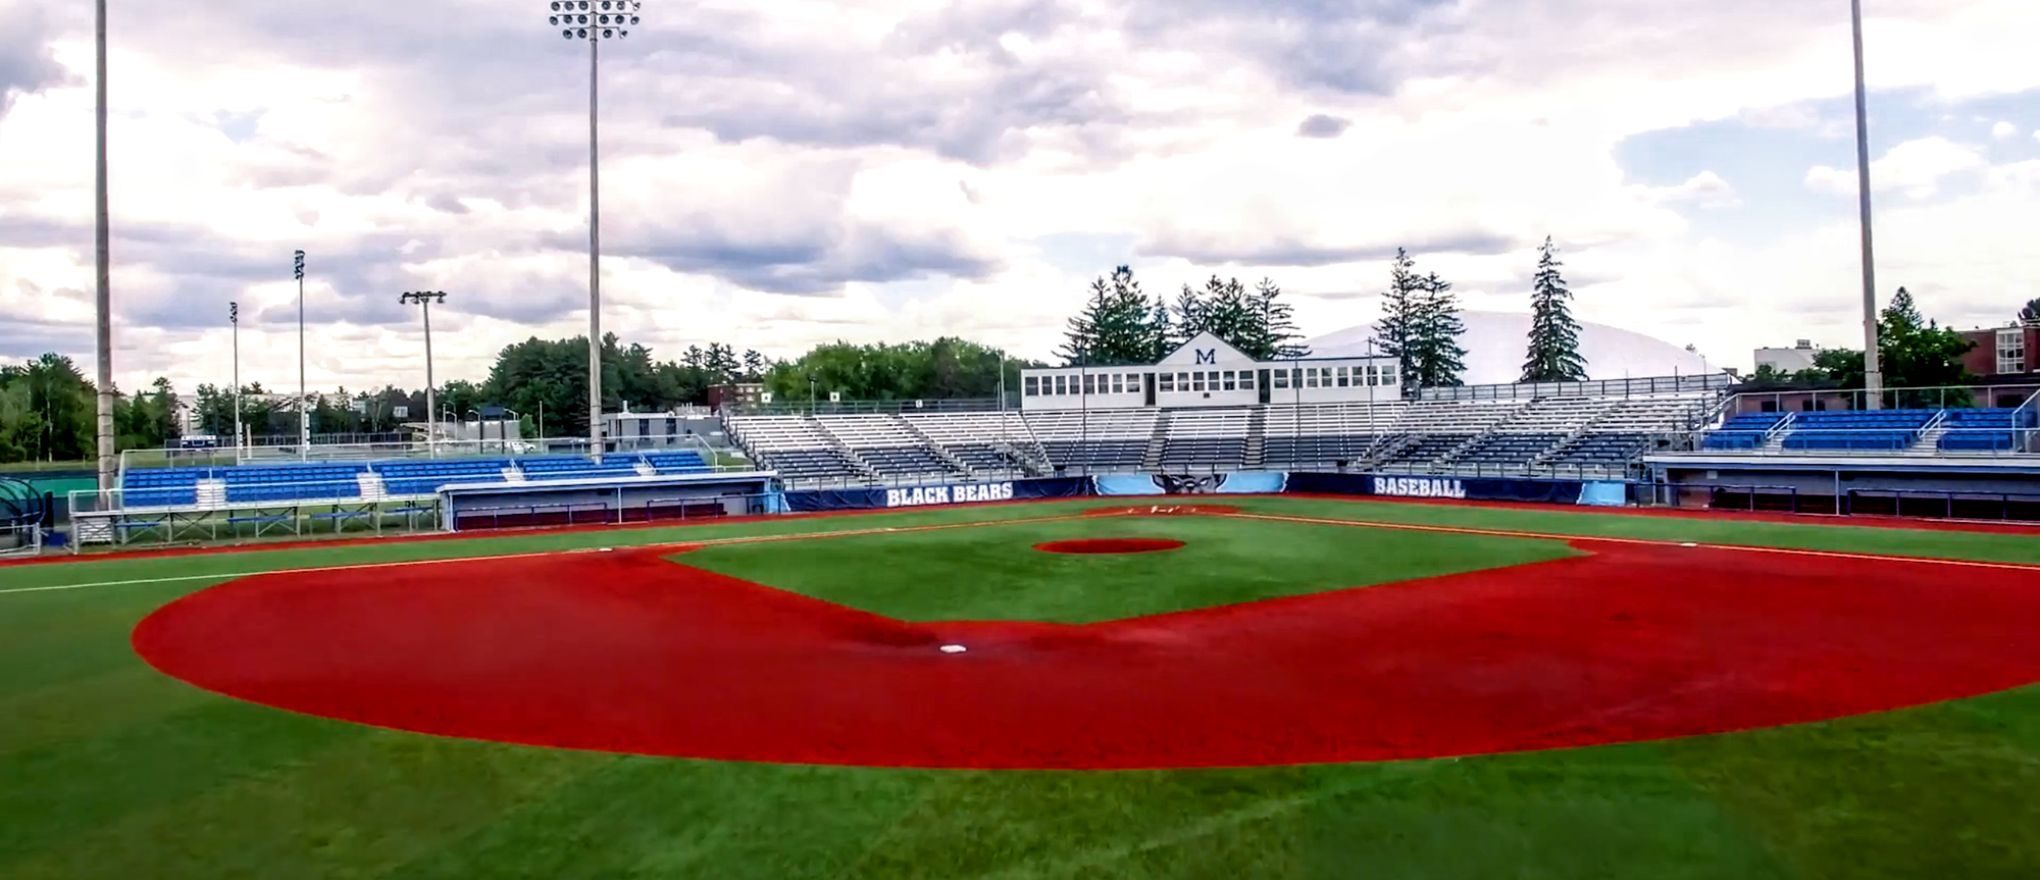 UMaine Baseball - Maine Baseball Day Camp is coming up and still